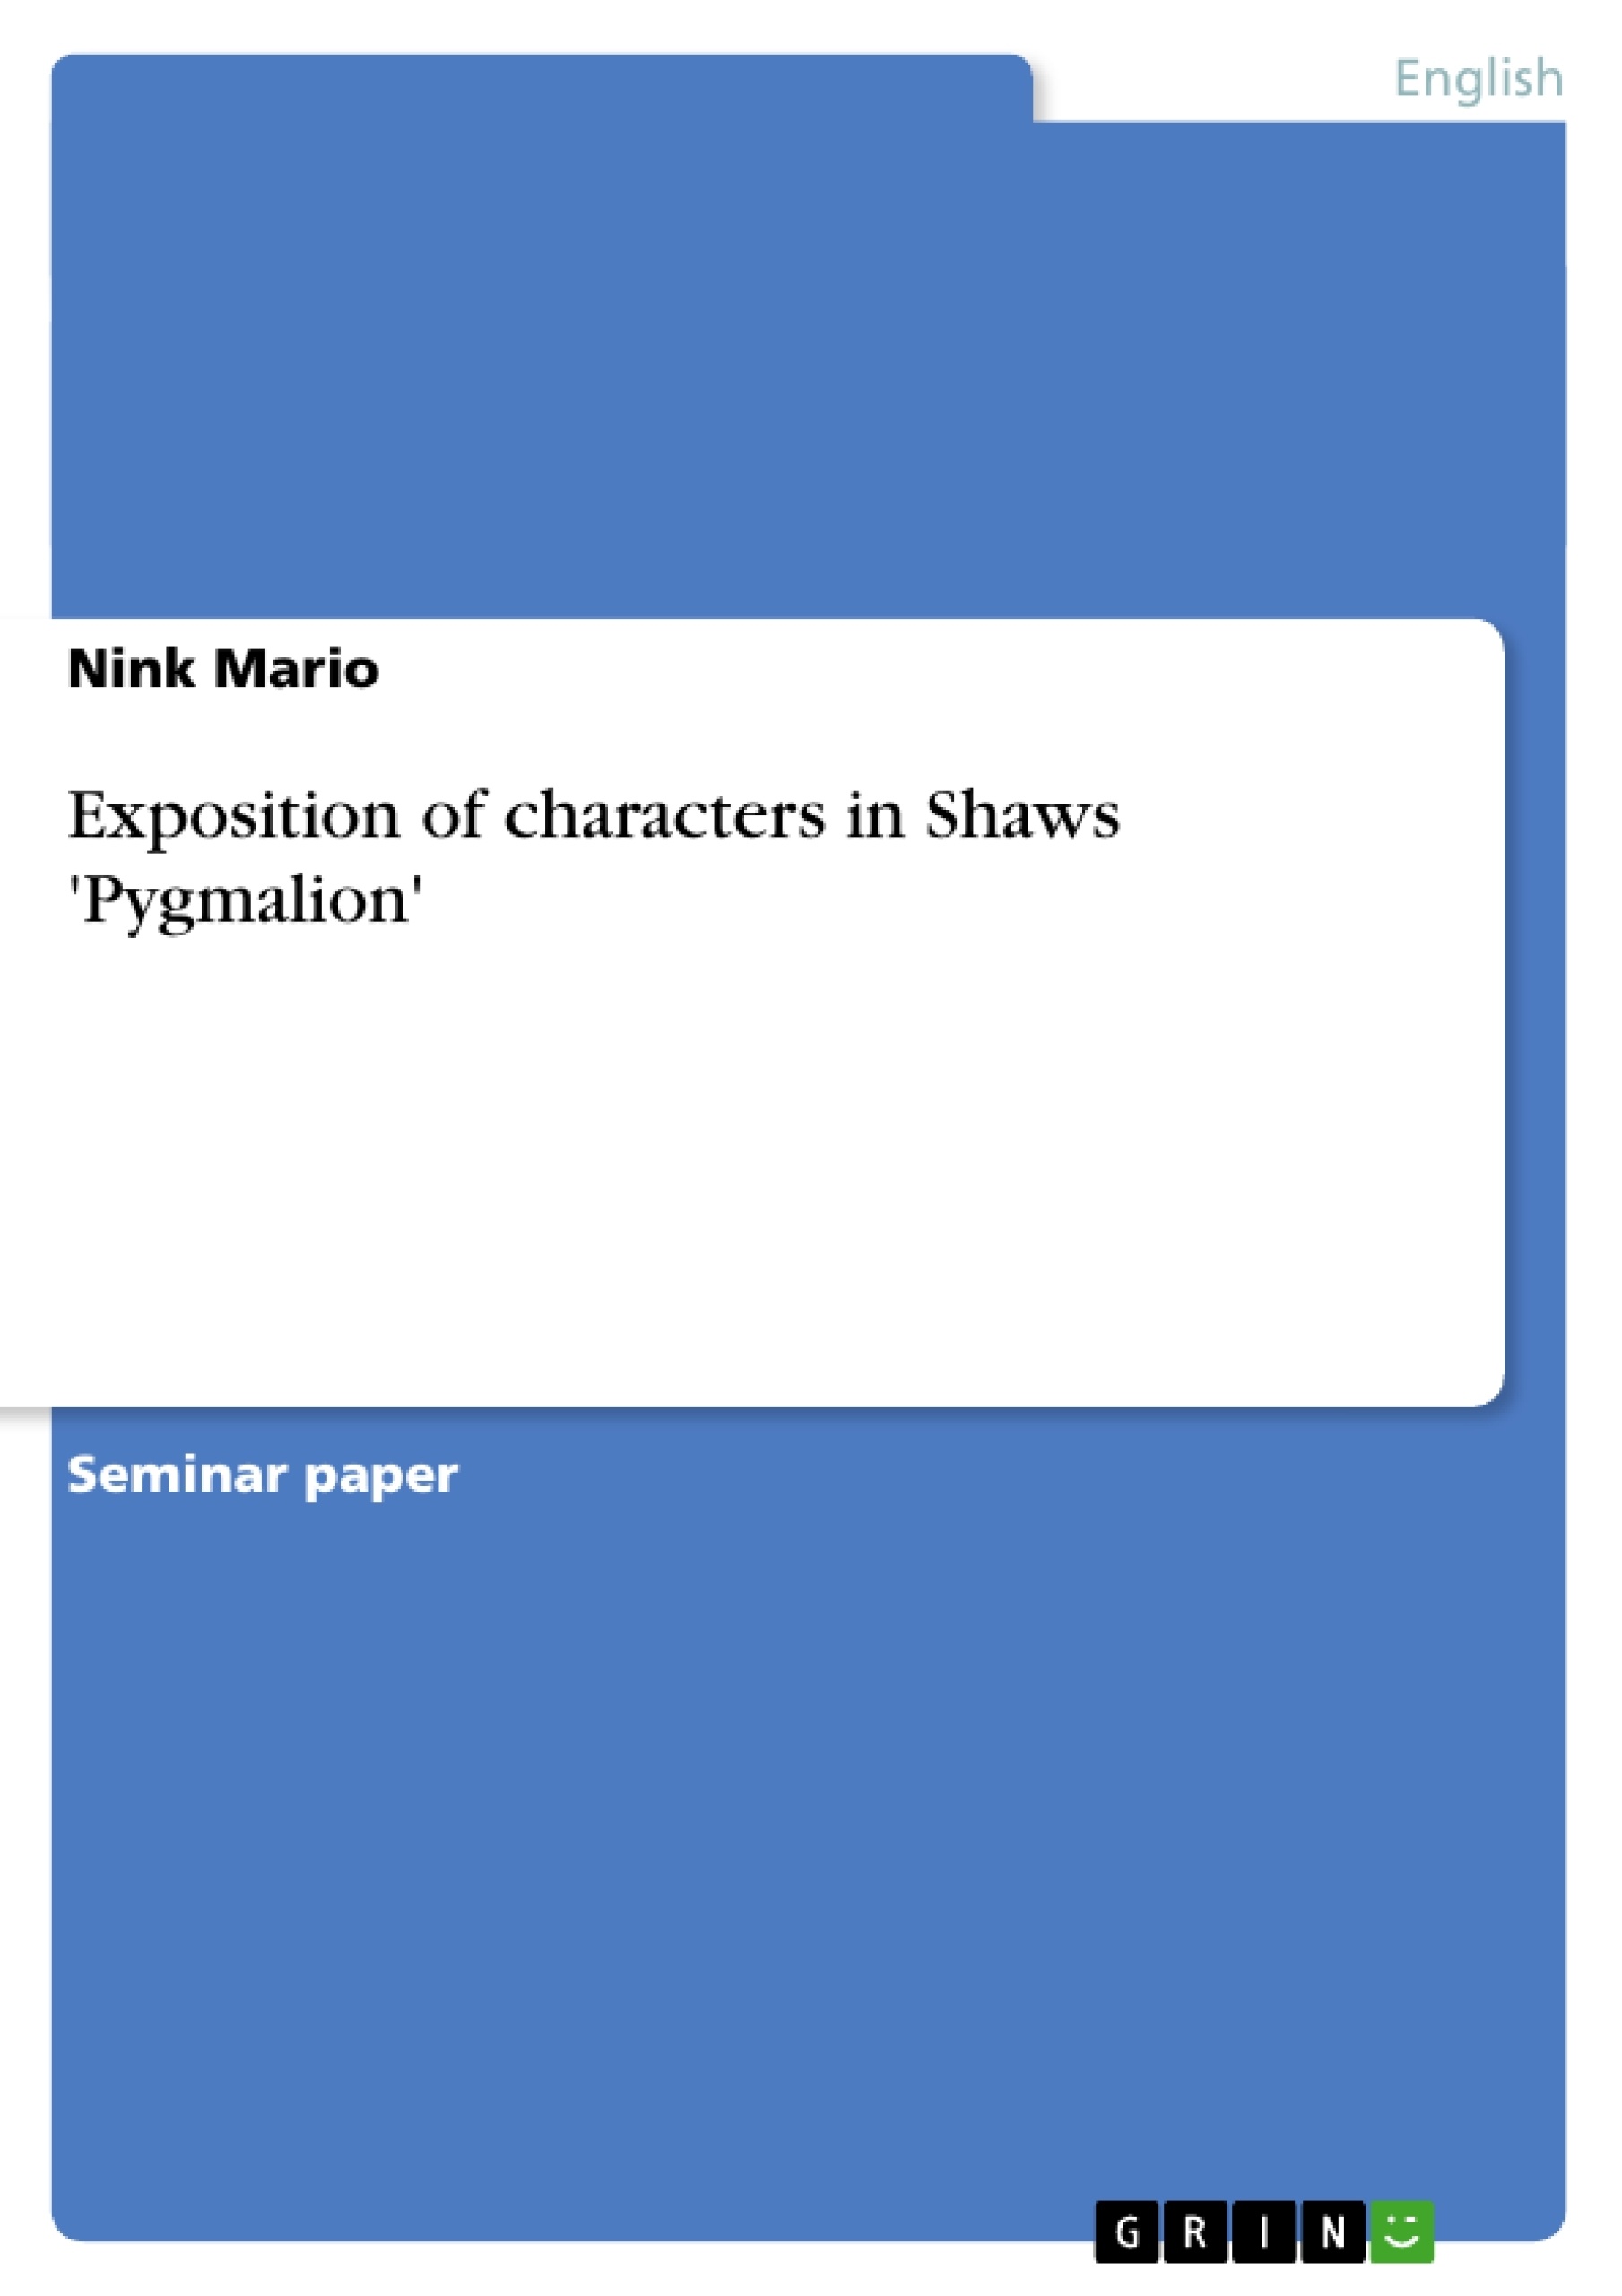 Title: Exposition of characters in Shaws 'Pygmalion'